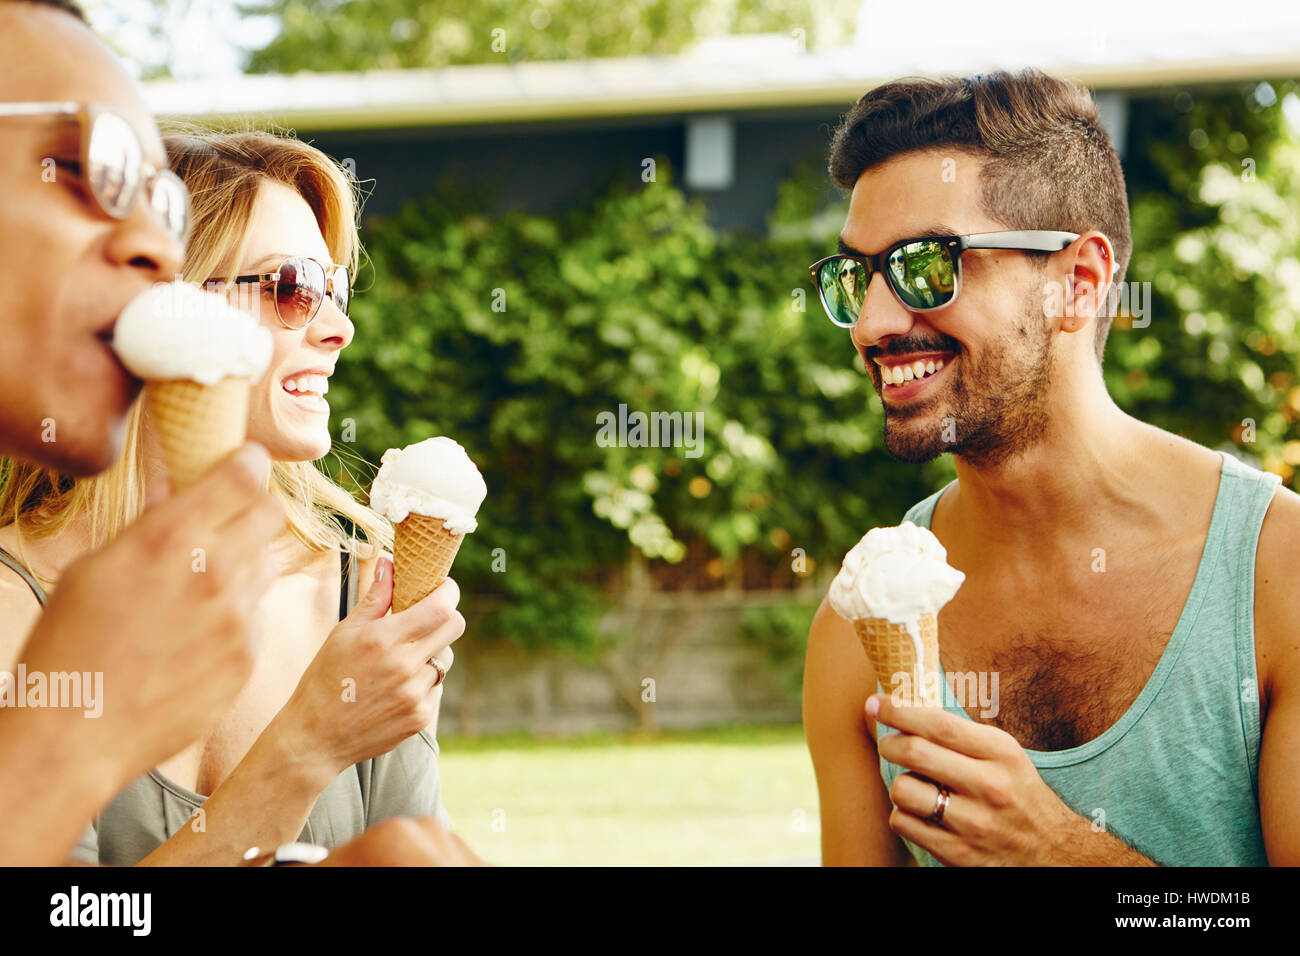 Male and female friends eating ice cream cones in park Stock Photo